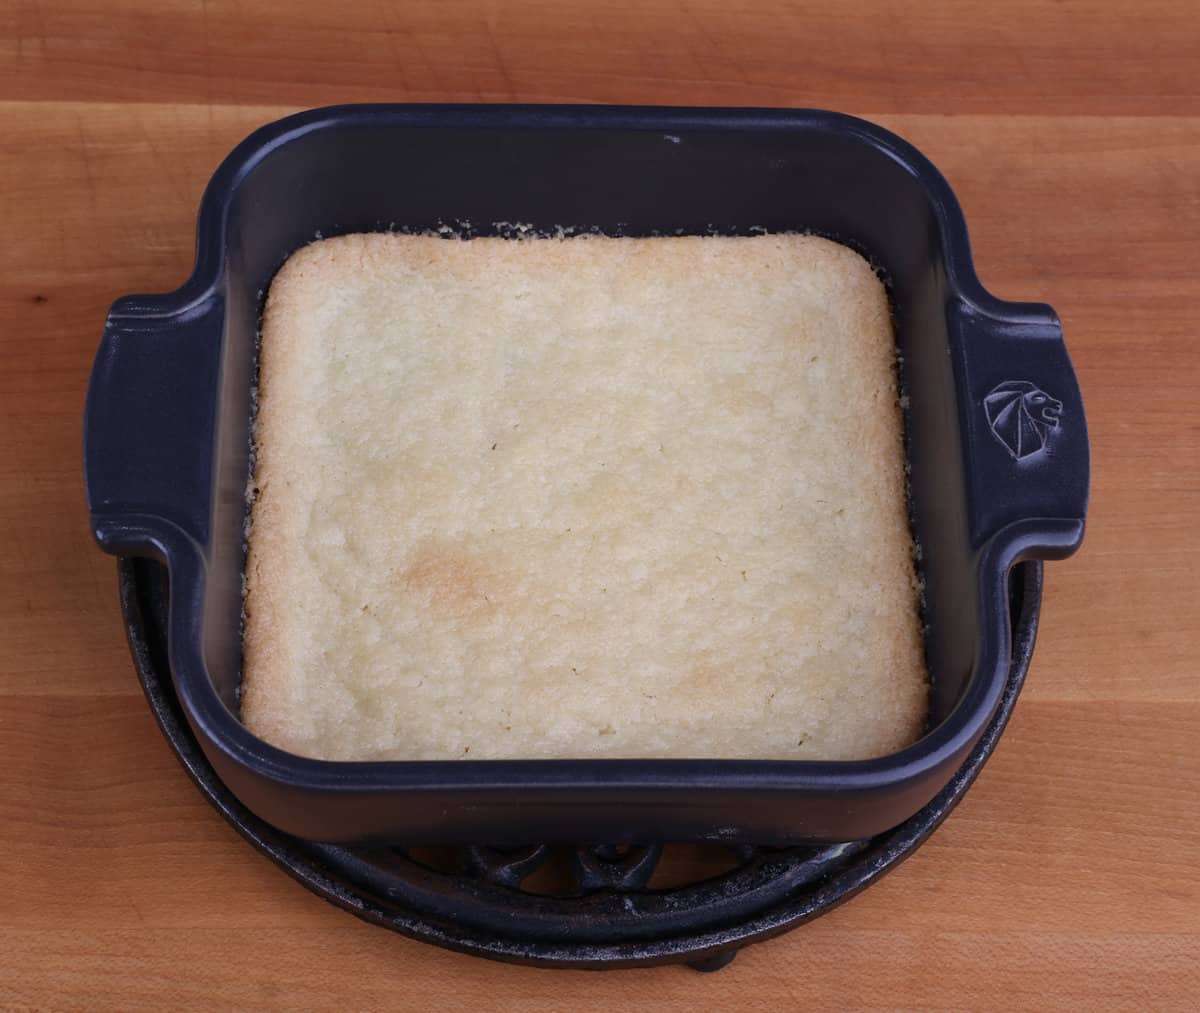 a small baked pie crust in a baking dish cooling on a kitchen counter